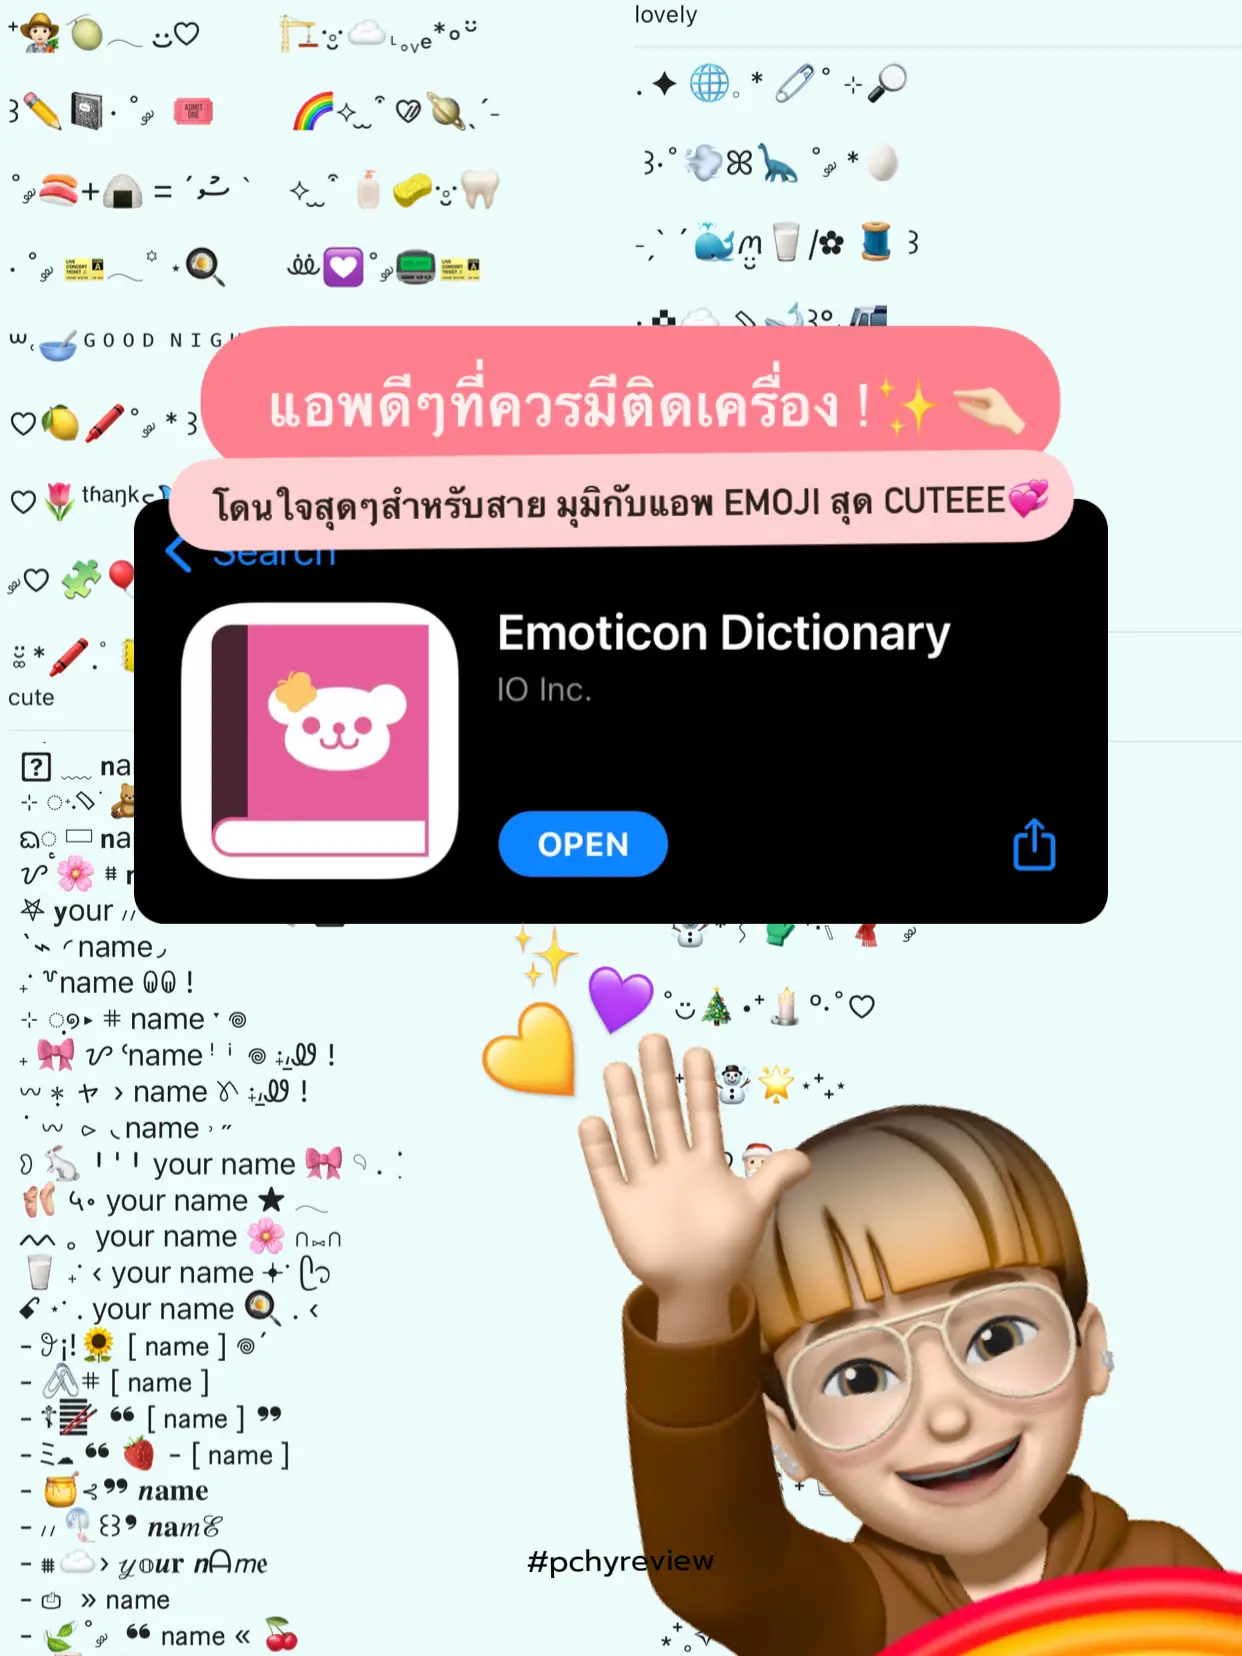 The Cursed Emoji. A emoji only found in one IPhone 6 whoever